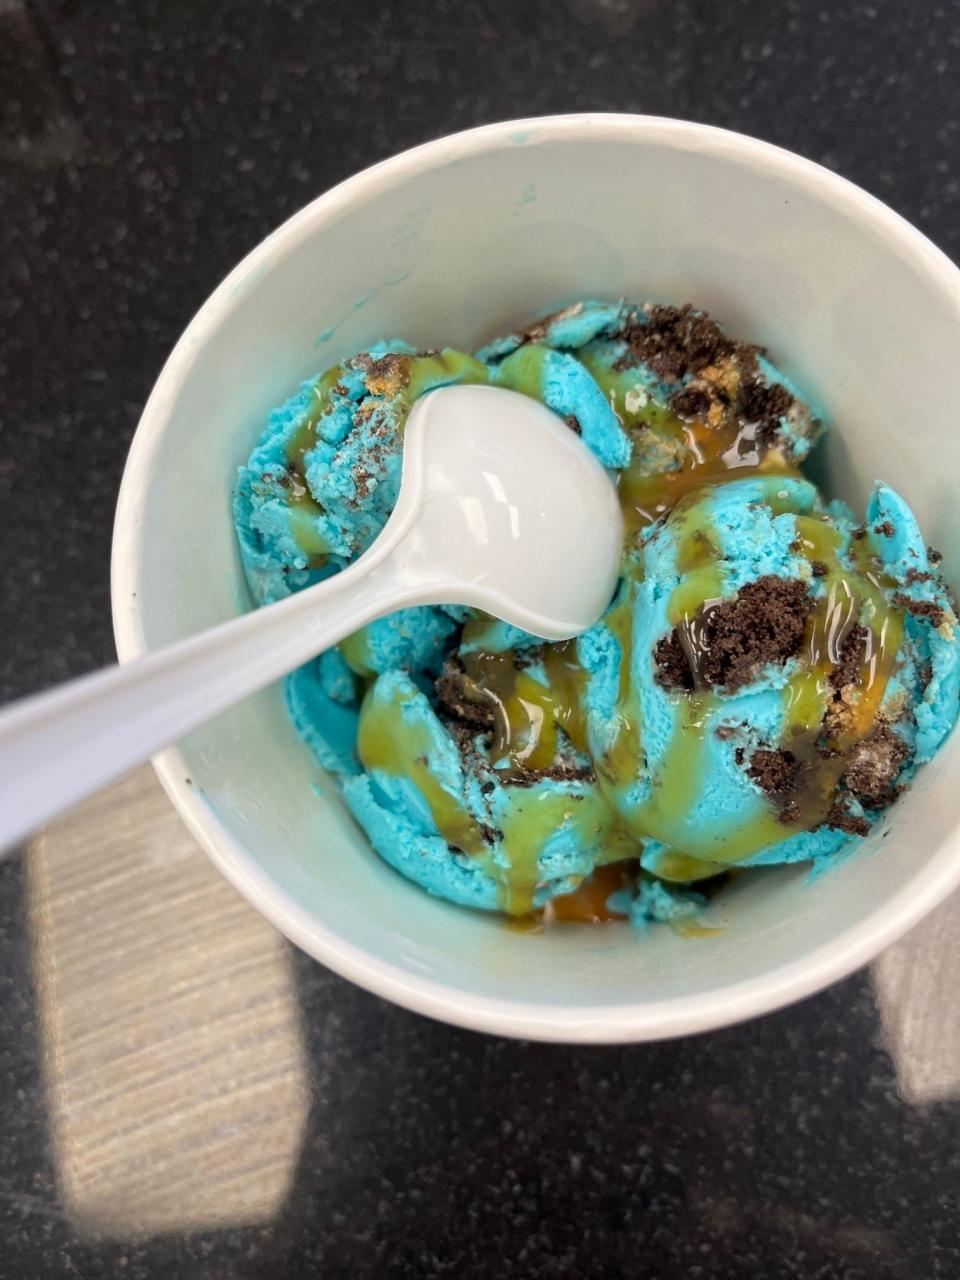 A cup of Fox Island Creamery's Cookie Monster ice cream shown with a caramel sauce.   That flavor is the favorite among kids. The creamery is located in the Cosmos Supermarket in Hewitt section of West Milford.